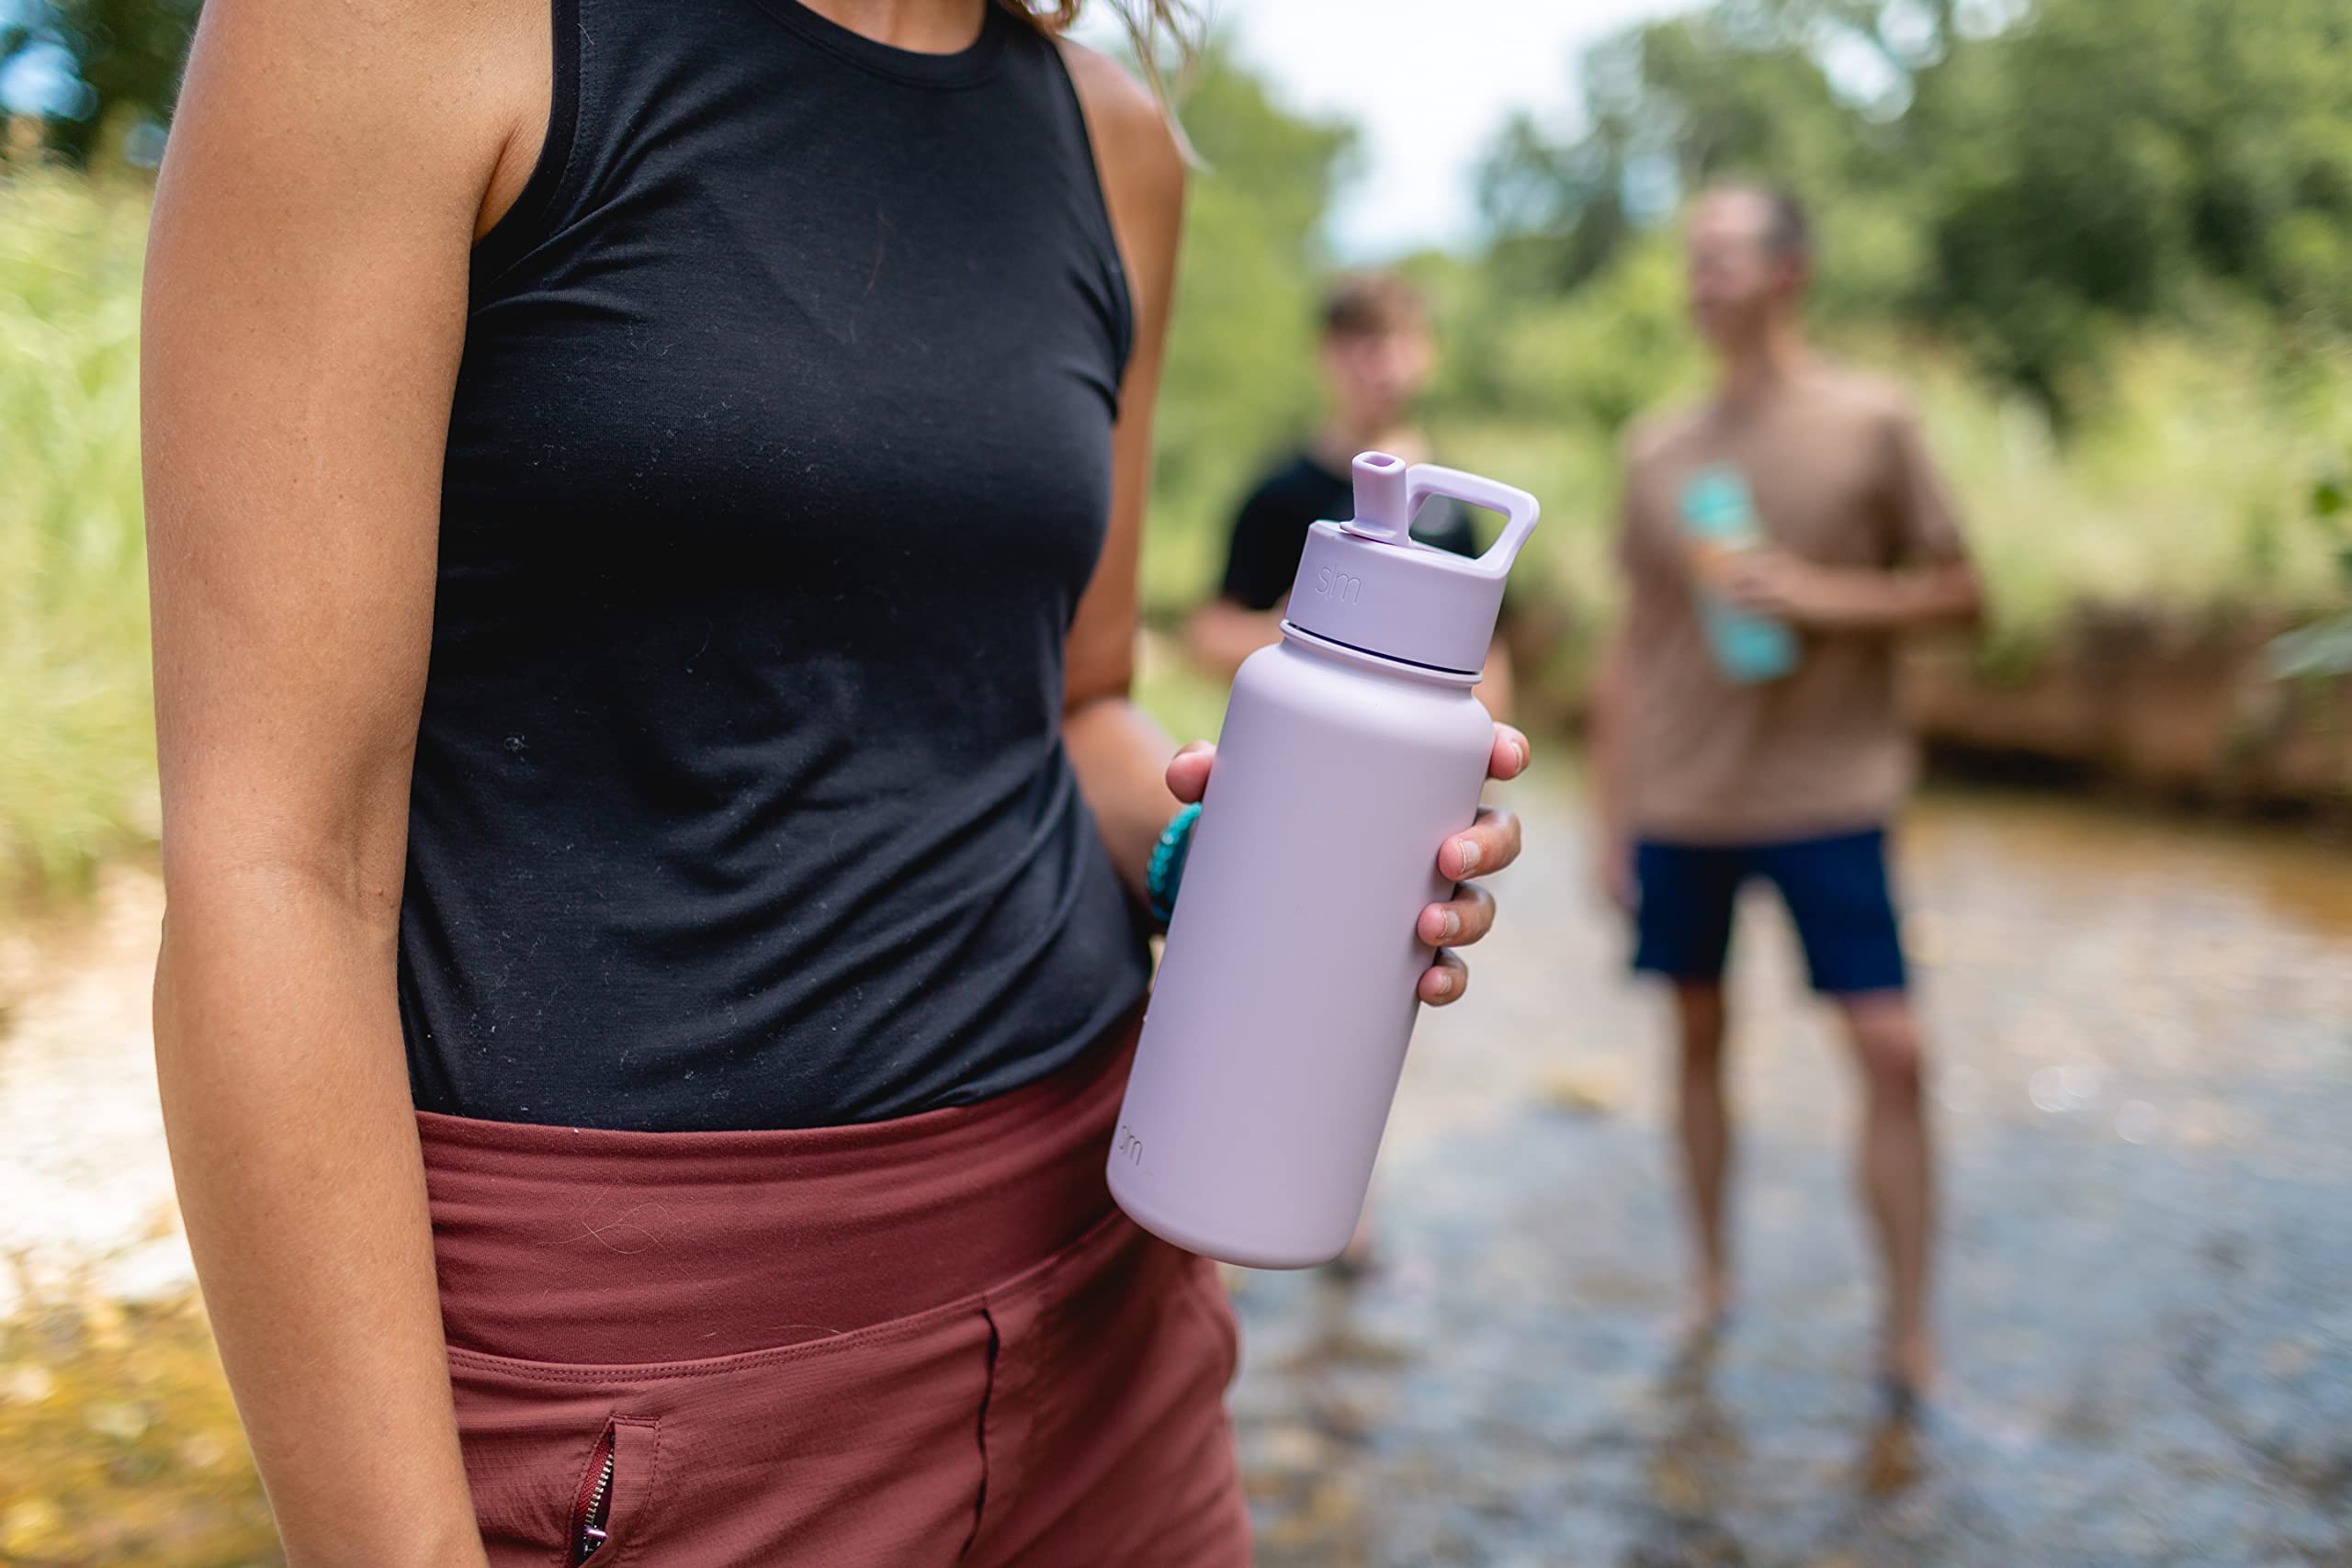 Simple Modern Insulated Straw Lid - Fits All Summit and Hydro Flask Wide Mouth Water Bottle Sizes - Insulated Splash Proof Cap for 10-128oz- Lavender Mist